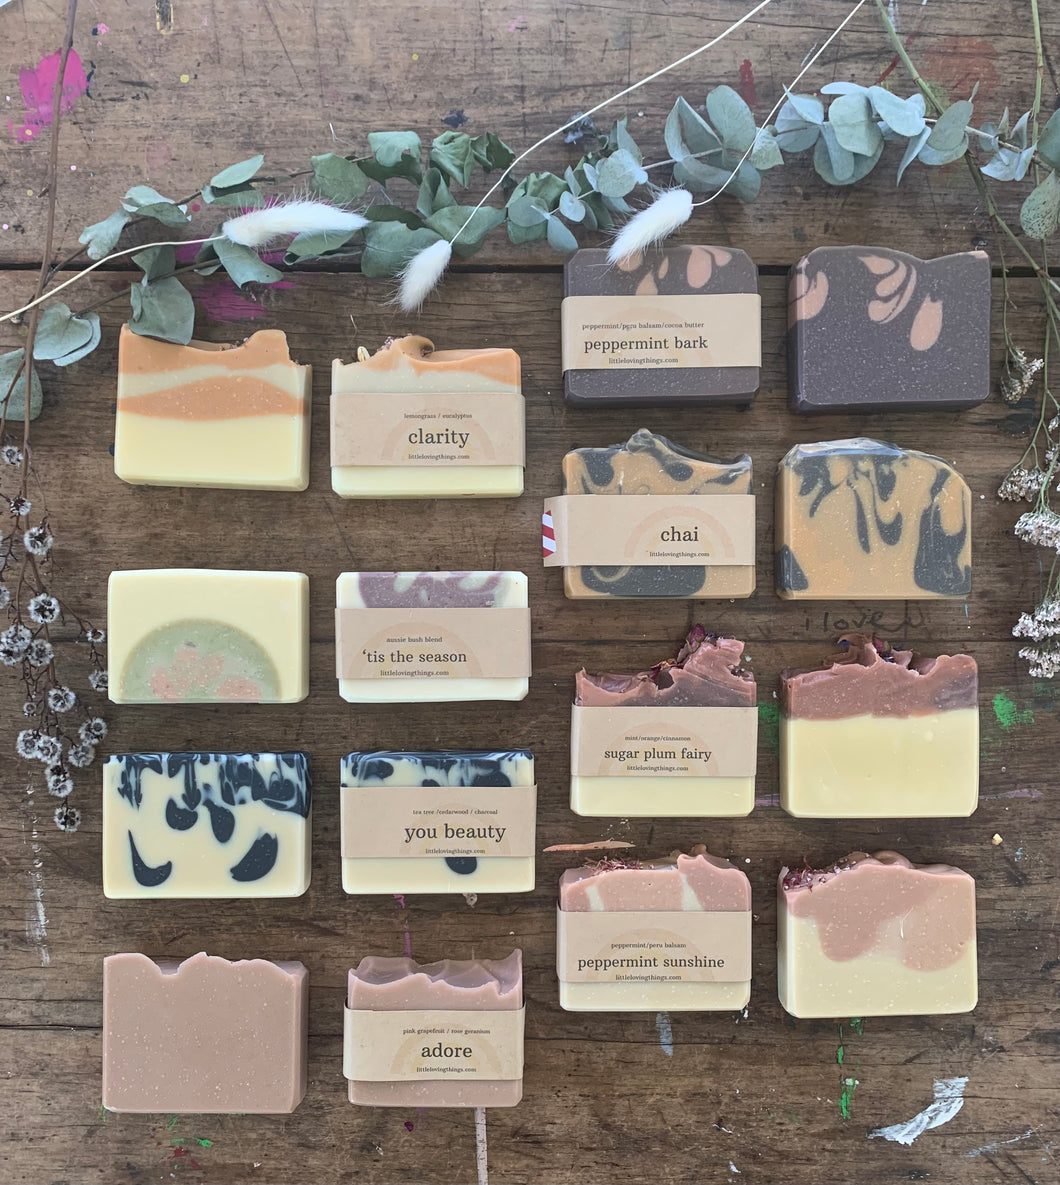 5 for $40 - Any Soap - Your Choice